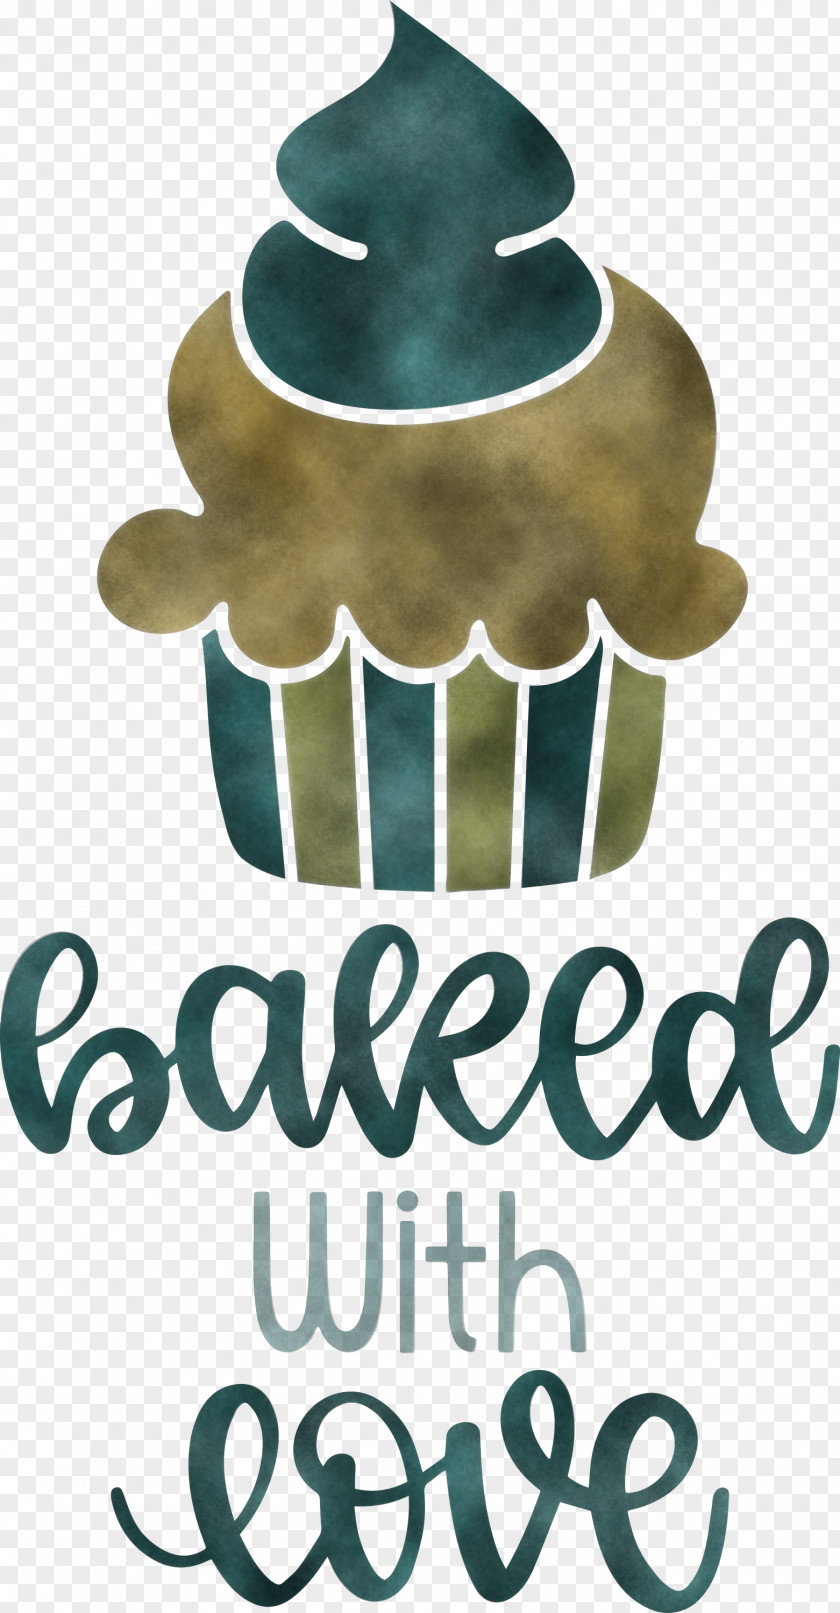 Baked With Love Cupcake Food PNG